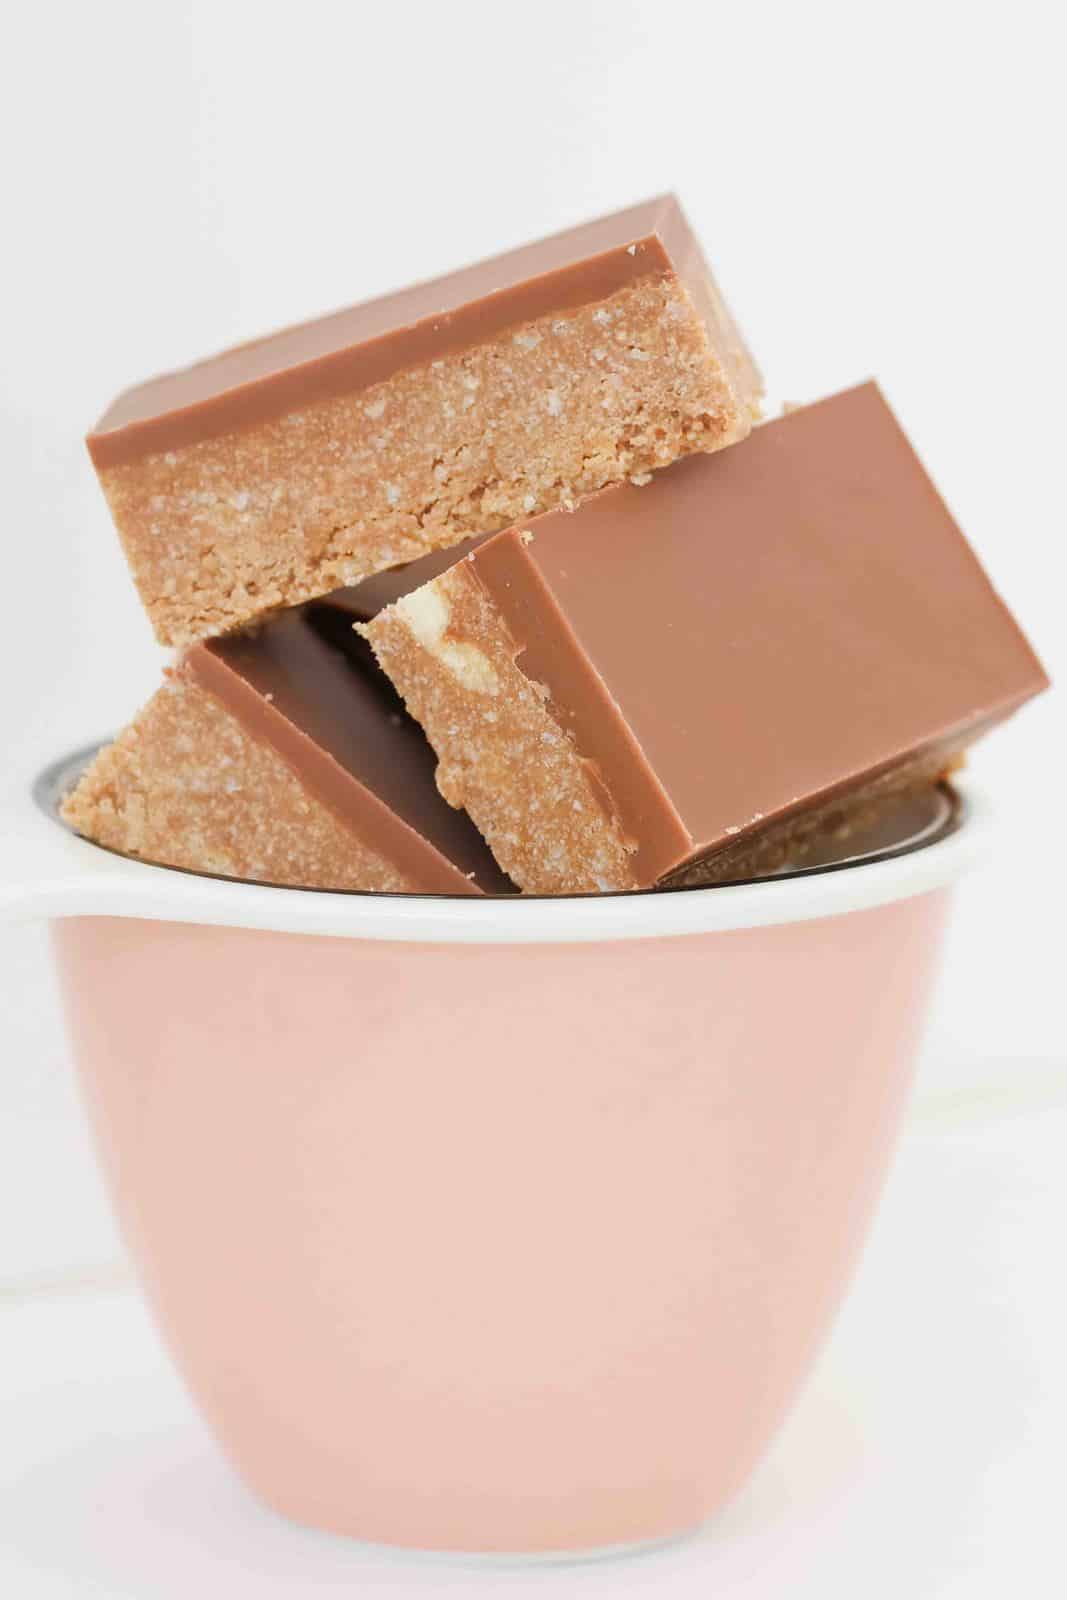 Pieces of no-bake chocolate slice with chocolate topping, stacked in a small bowl.